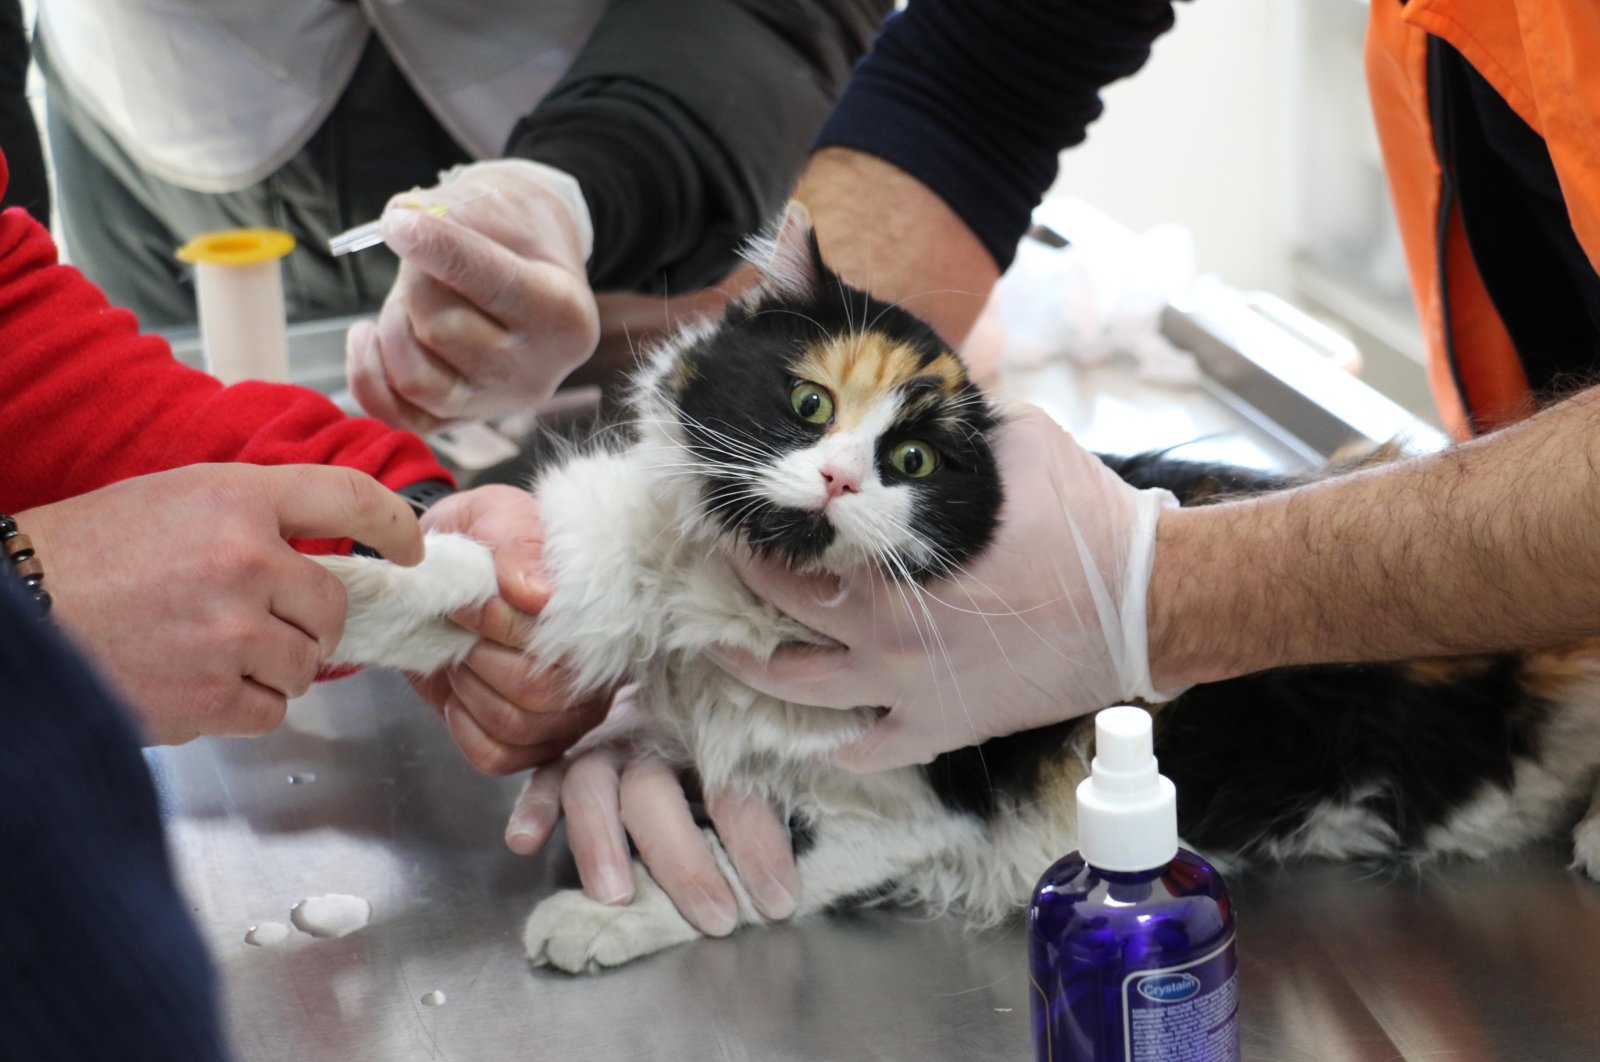 A cat rescued from the wreckage after the earthquake receives treatment in an animal shelter, Kahramanmaraş, Türkiye, Feb. 22, 2023. (DHA Photo)